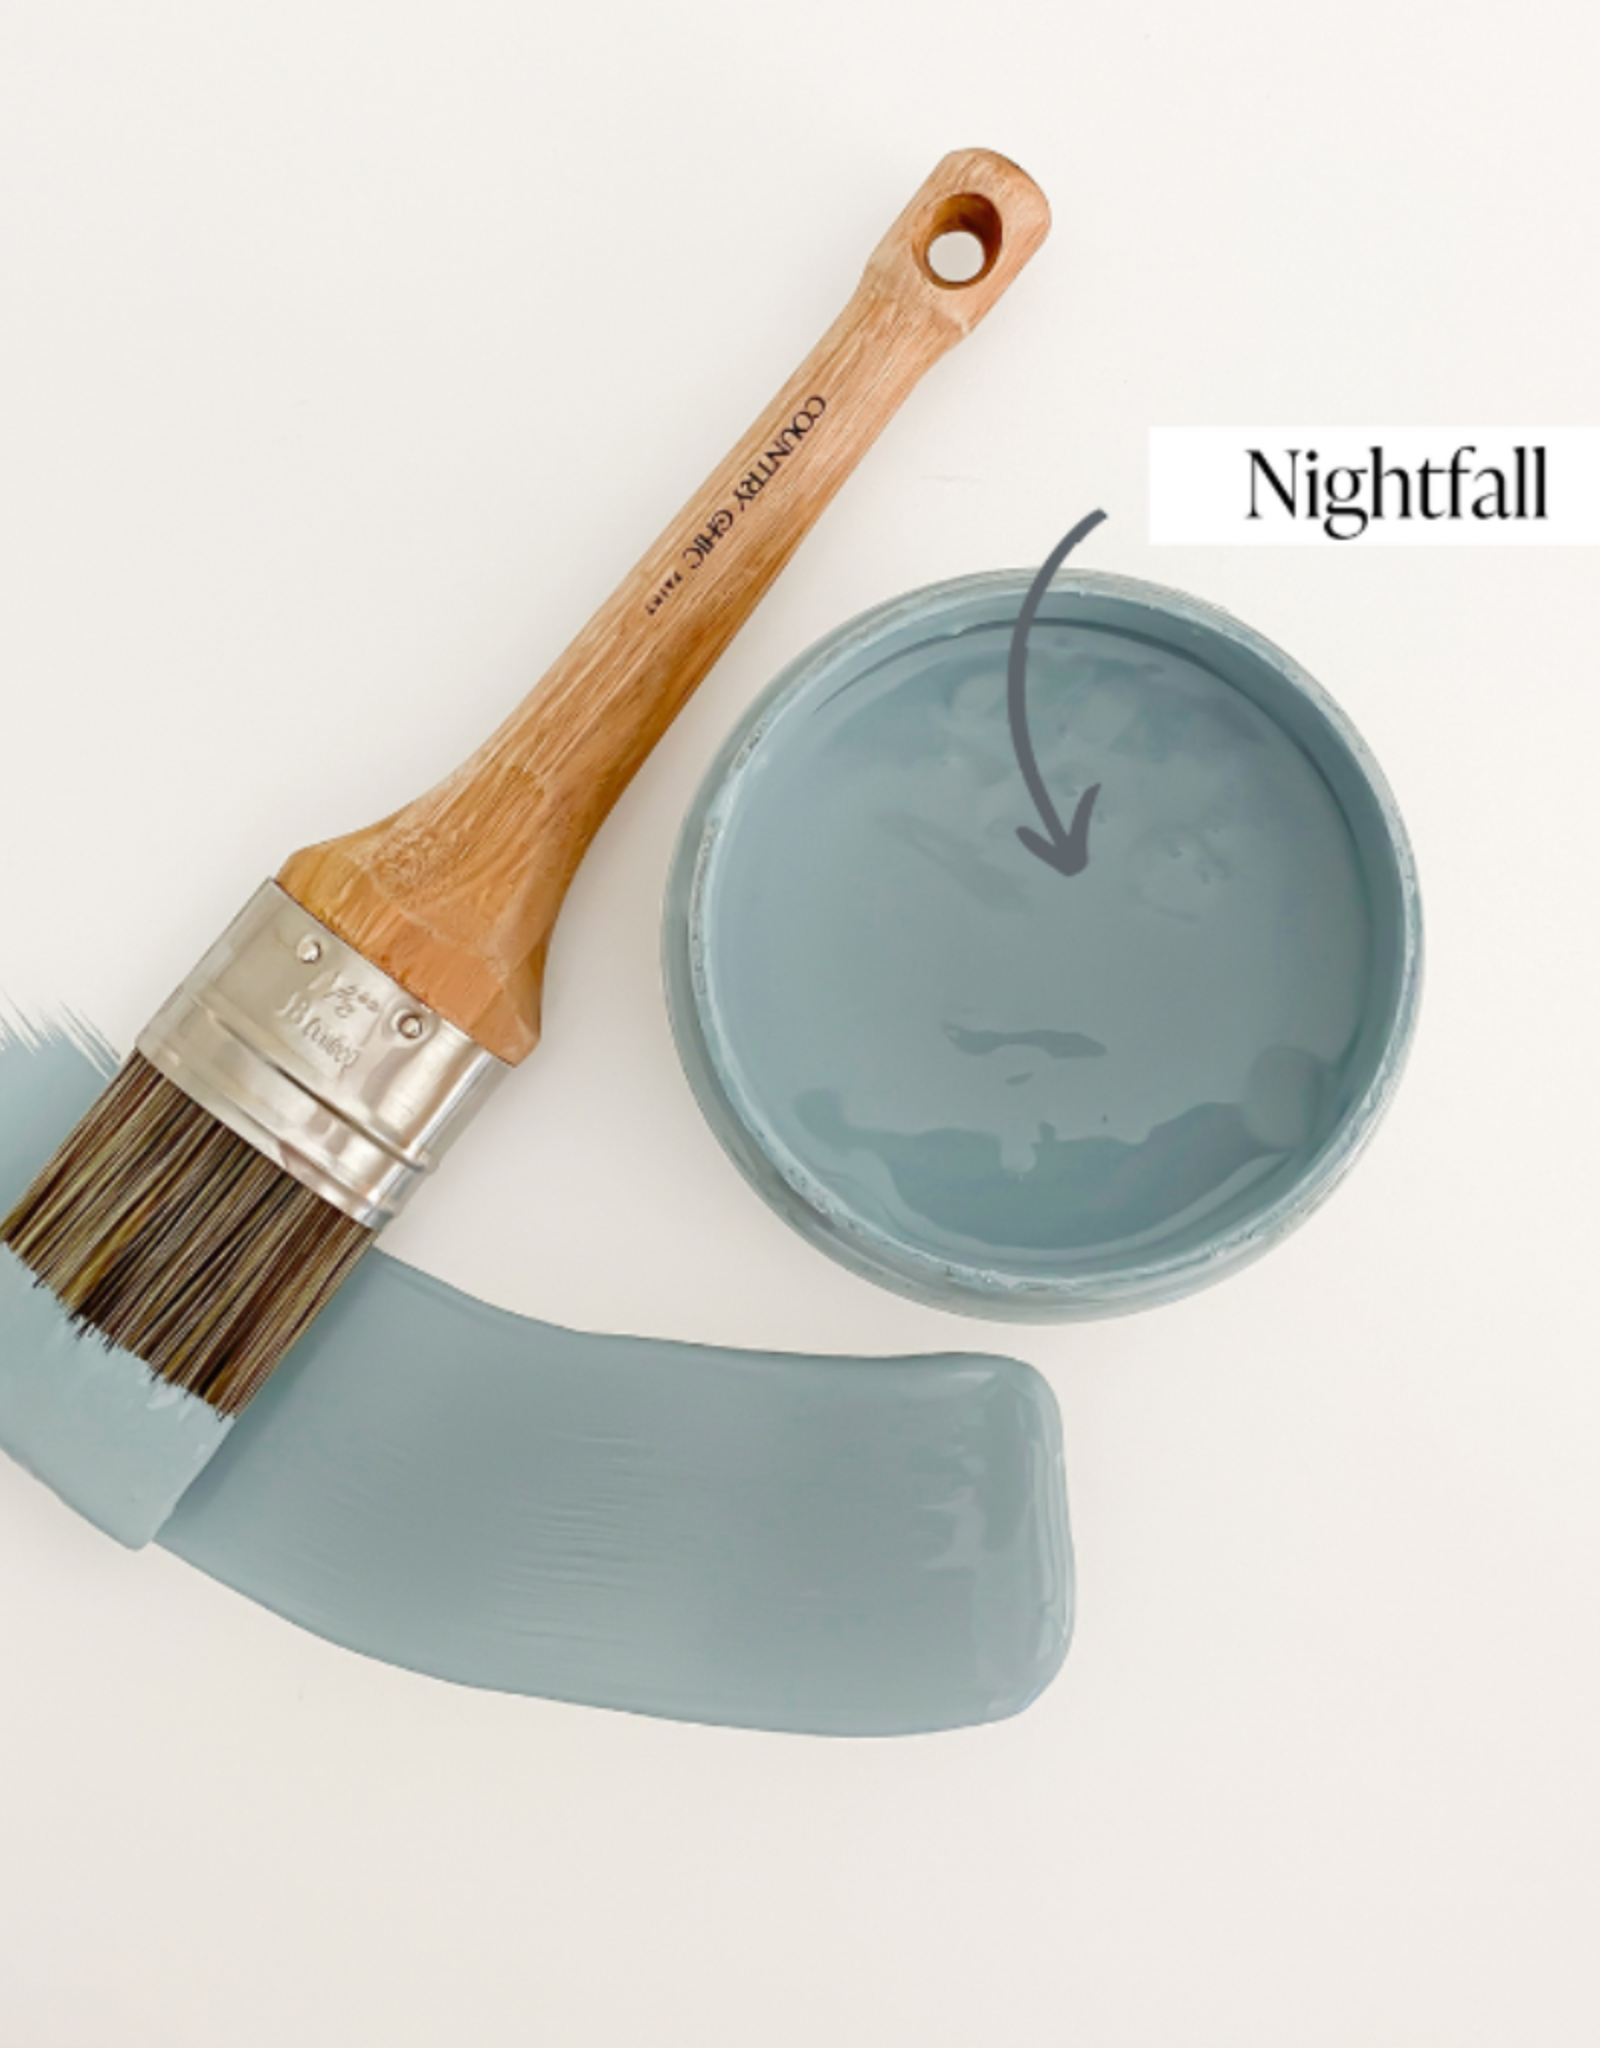 Country Chic Country Chic Paint Sample - 4oz Nightfall